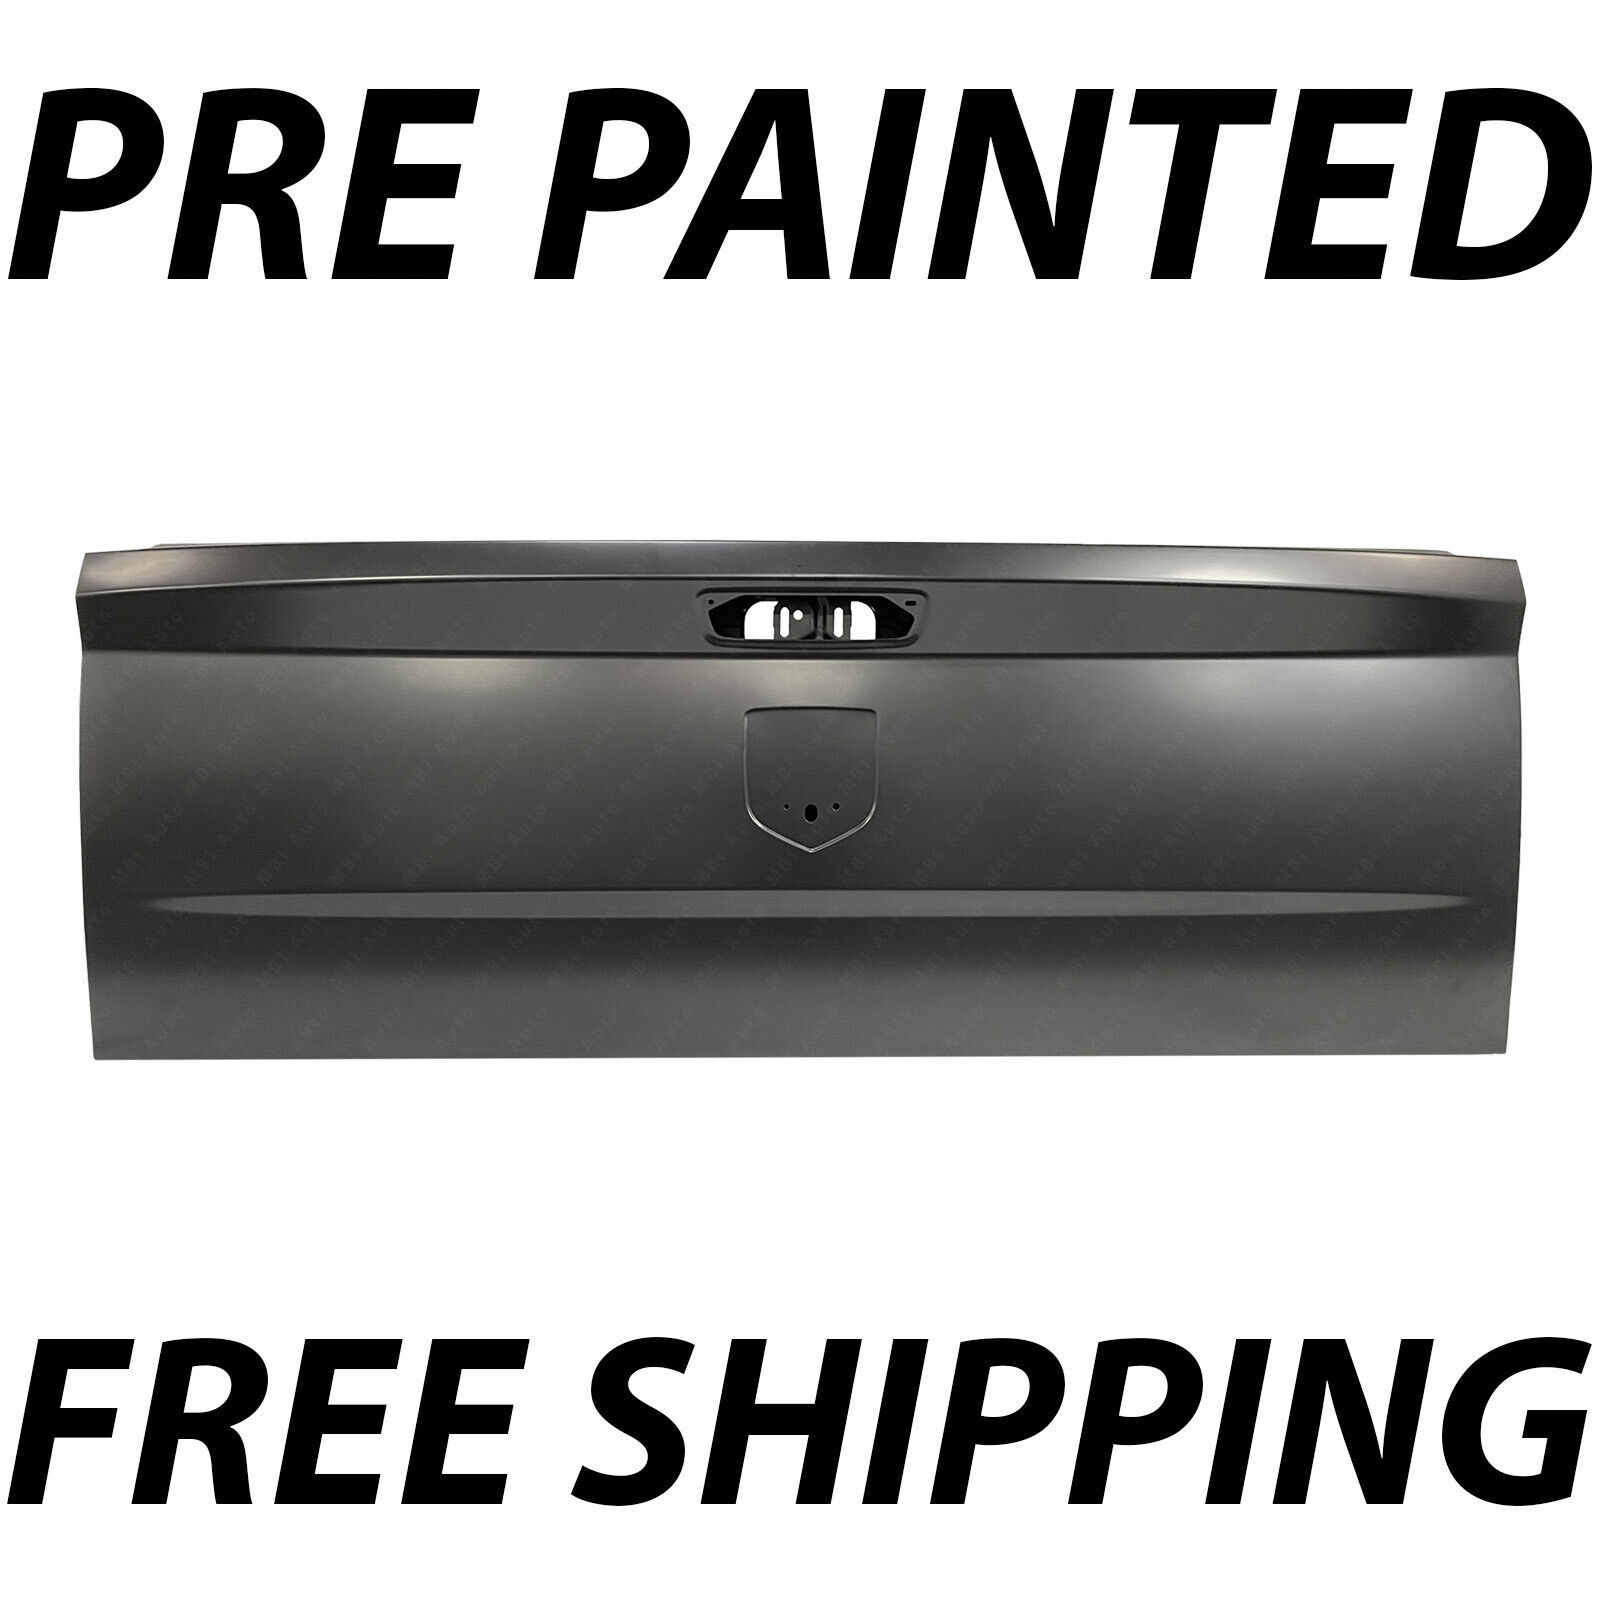 NEW Painted To Match Rear Tailgate for 2010-2018 RAM Pickup Truck 1500 2500 3500